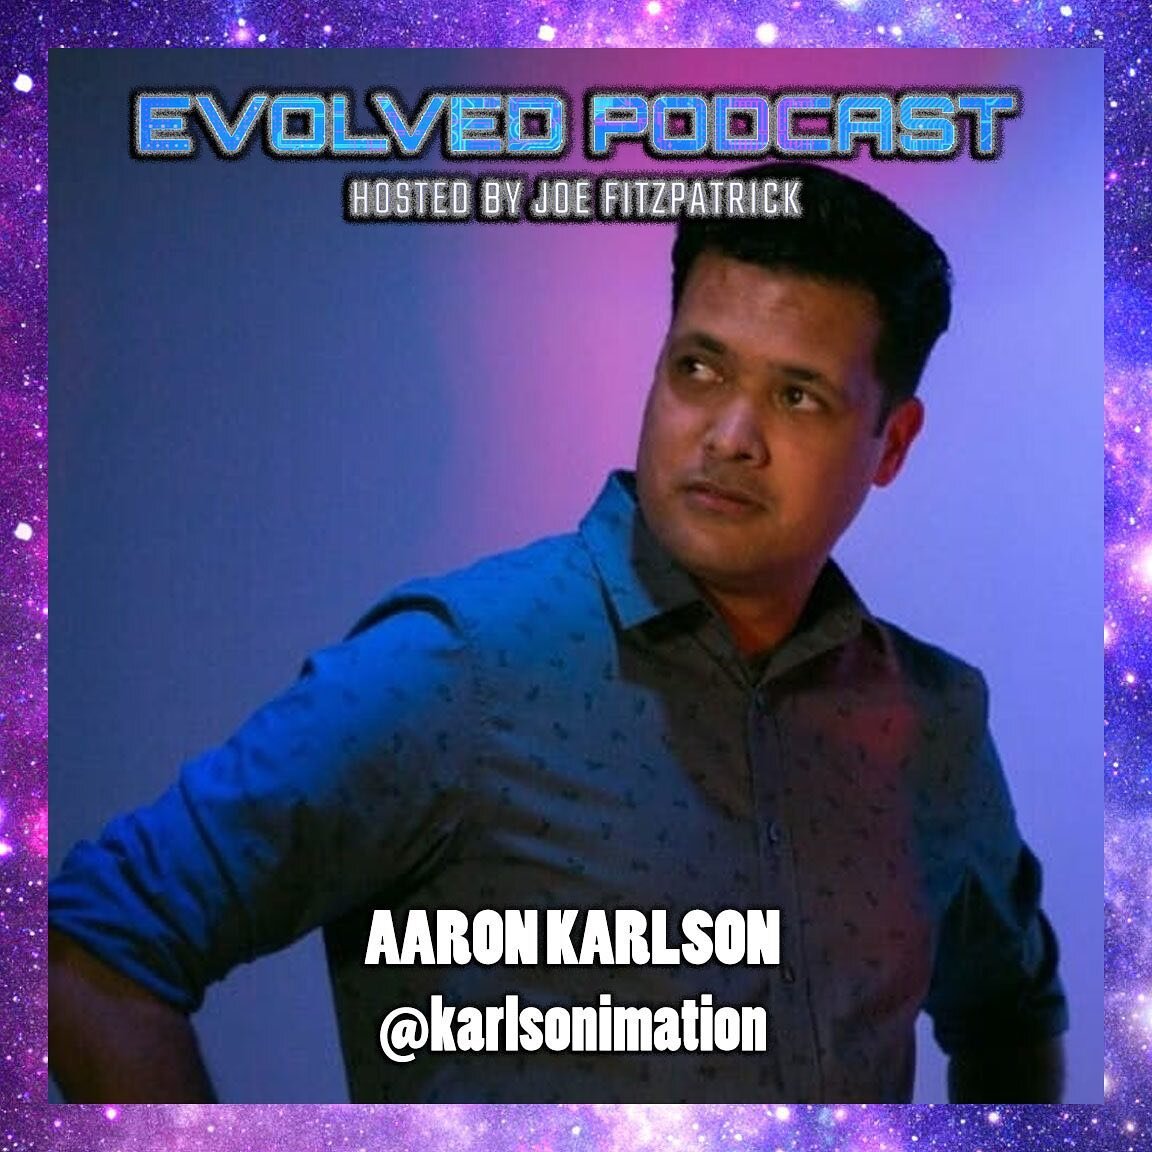 MAKE ART MORE INCLUSIVE: AARON KARLSON @karlsonimation REFLECTS ON THE VALUE OF ART AND HOW IT BENEFITS SOCIETY | EP. 020

Aaron Karlson is a 3D artist and animator from Chesapeake, Virginia, and he currently lives in Gainesville, Florida. Aaron knew